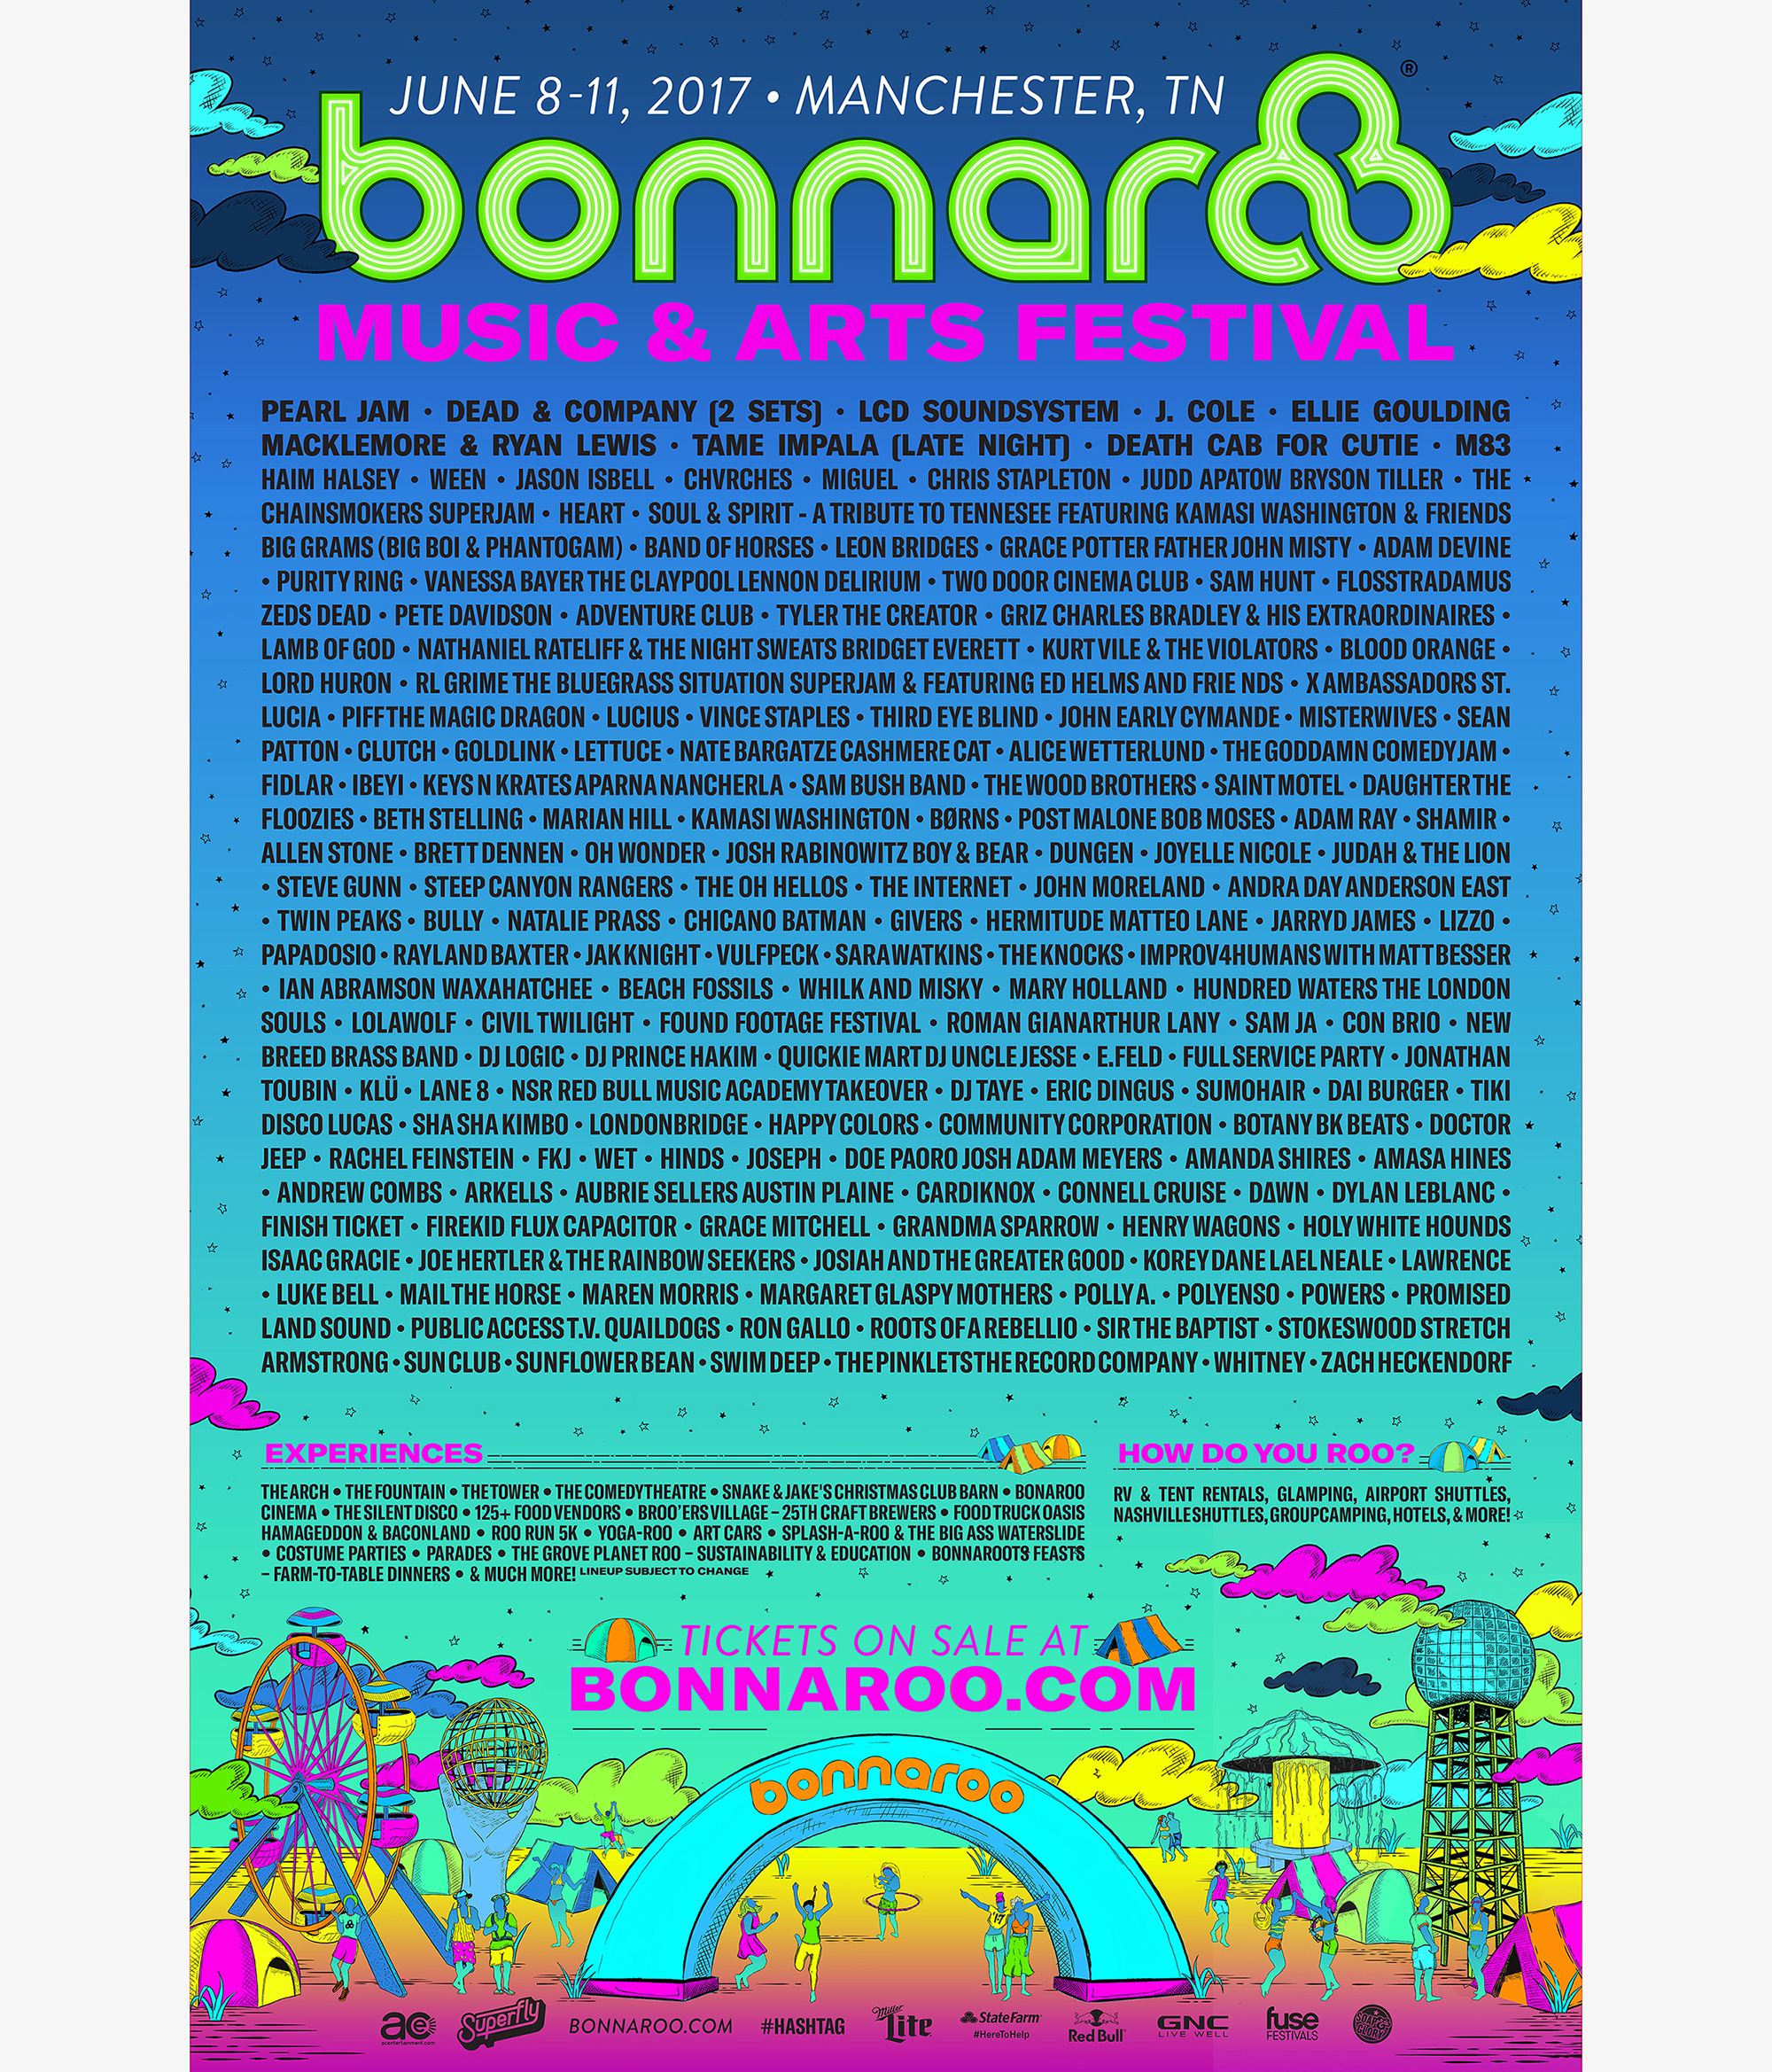 Illustrated poster featuring the Summer 2017 Bonnaroo Music & Arts Festival lineup.